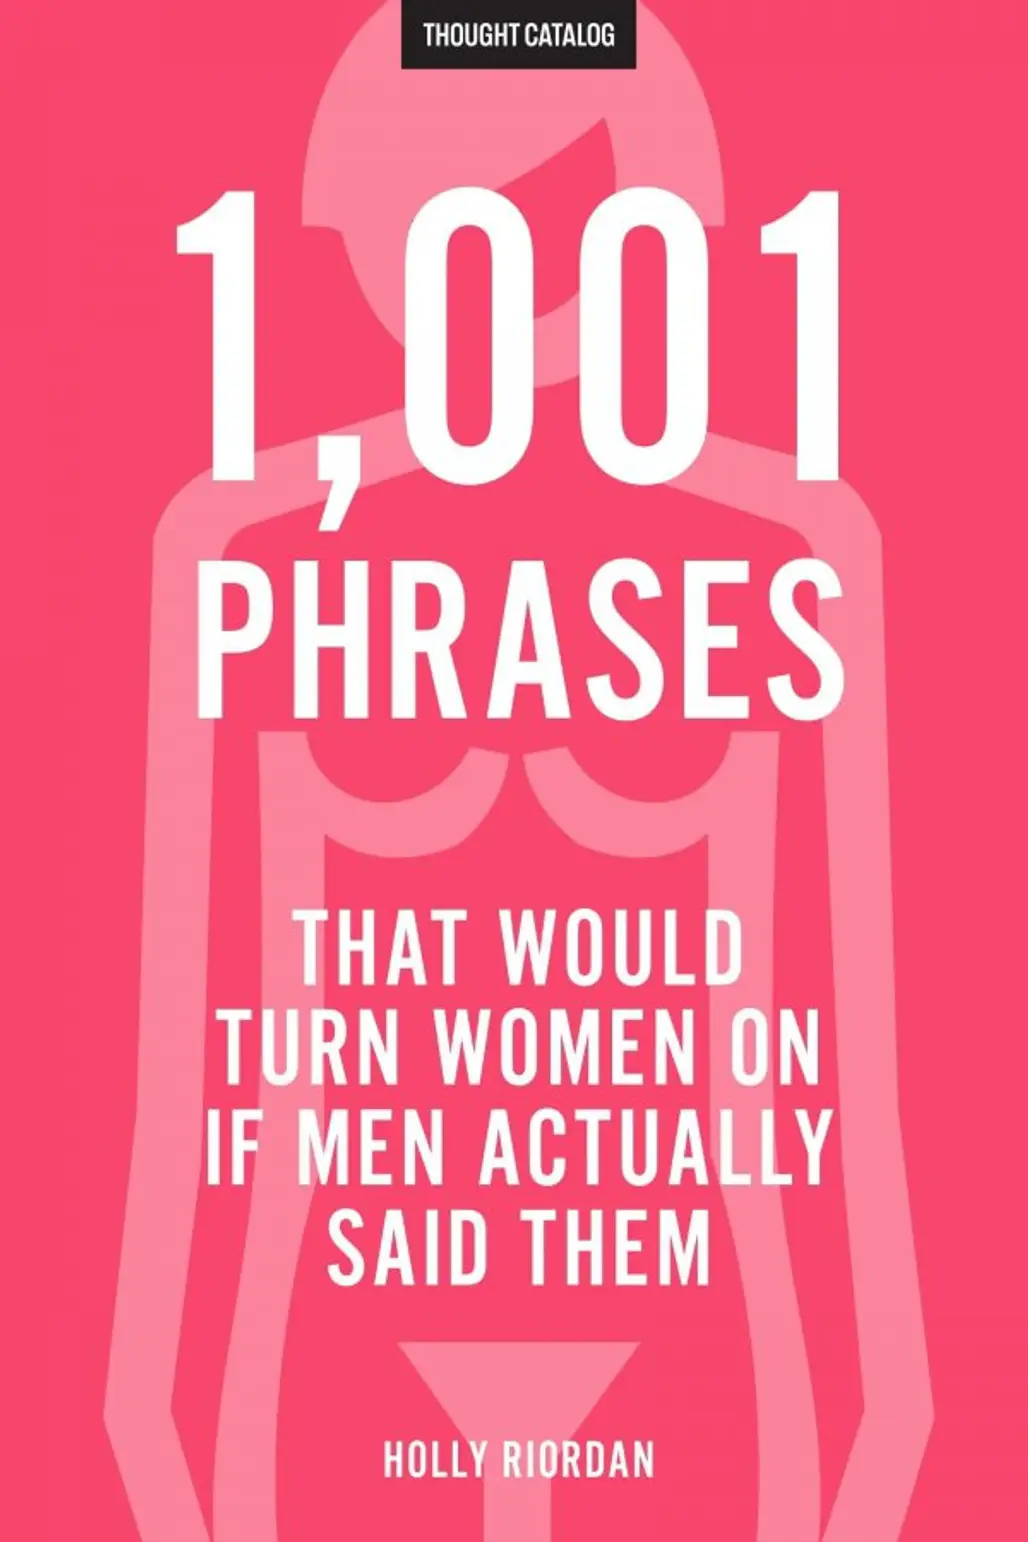 1,001 Phrases That Would Turn Women on if Men Actually Said Them by Holly Riordan (me)